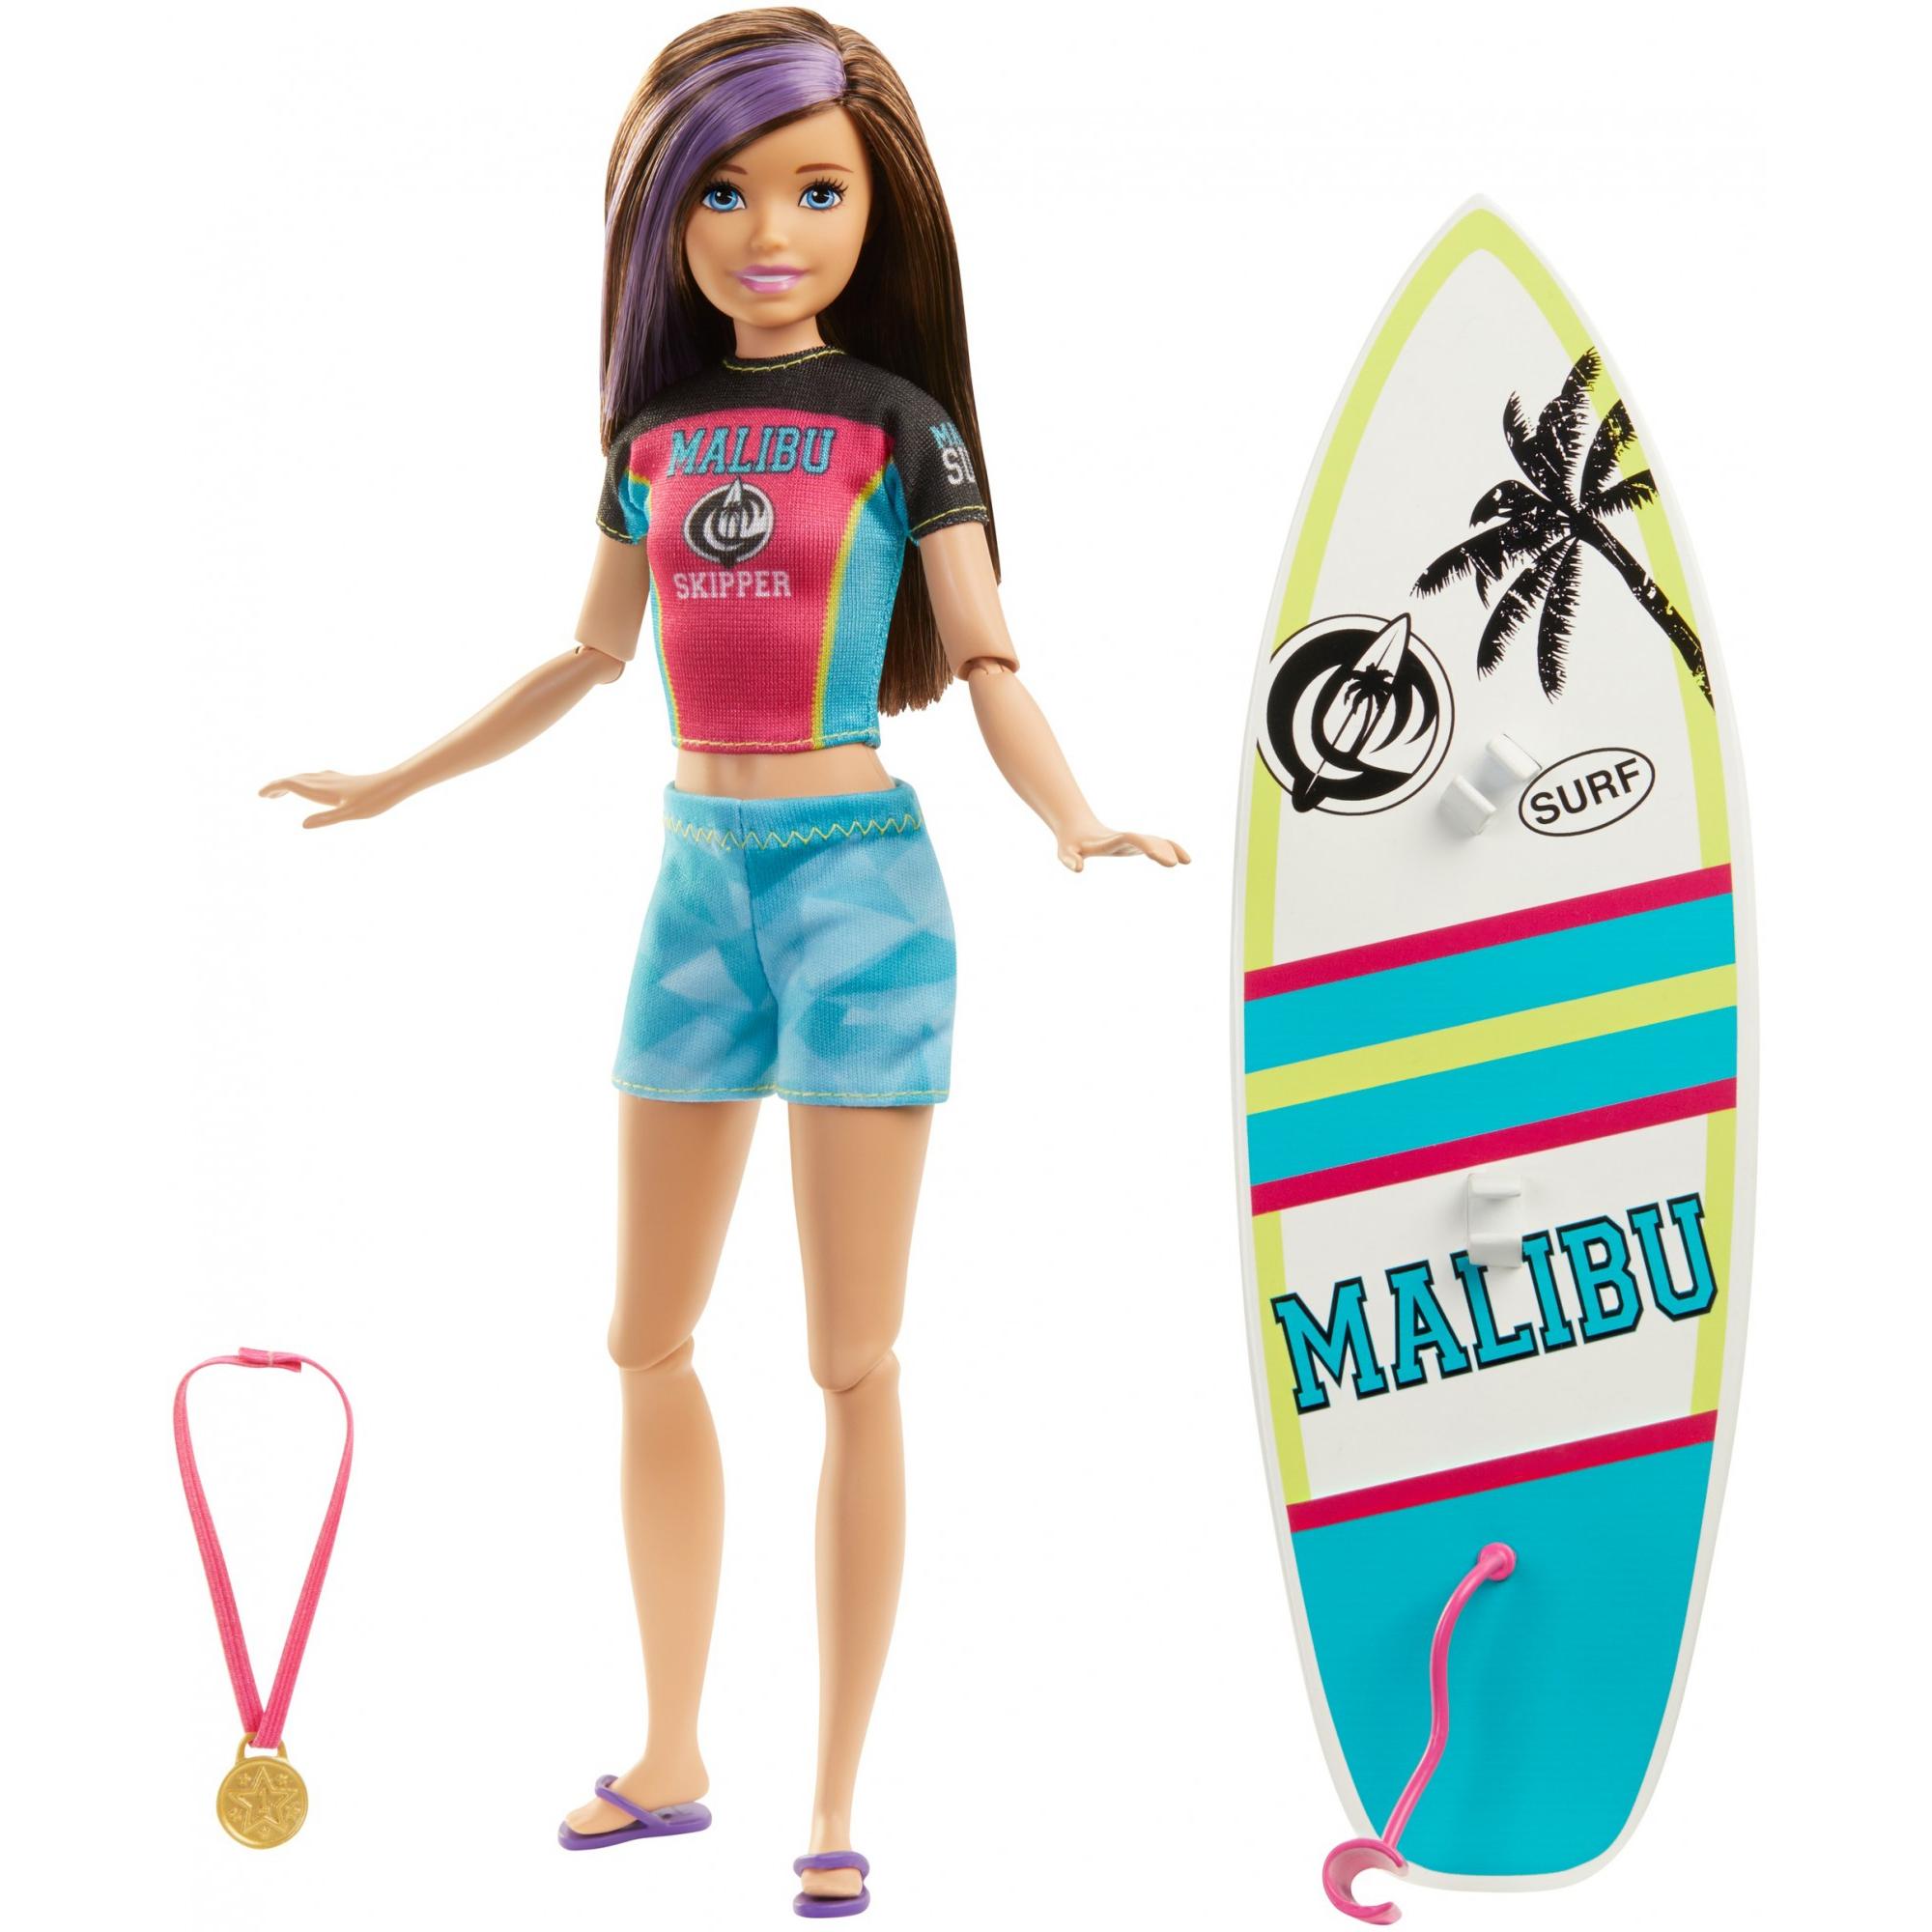 Barbie Dreamhouse Adventures Skipper Surf Doll, Approx. 11 Inch In Surfing Fashion, With Accessories